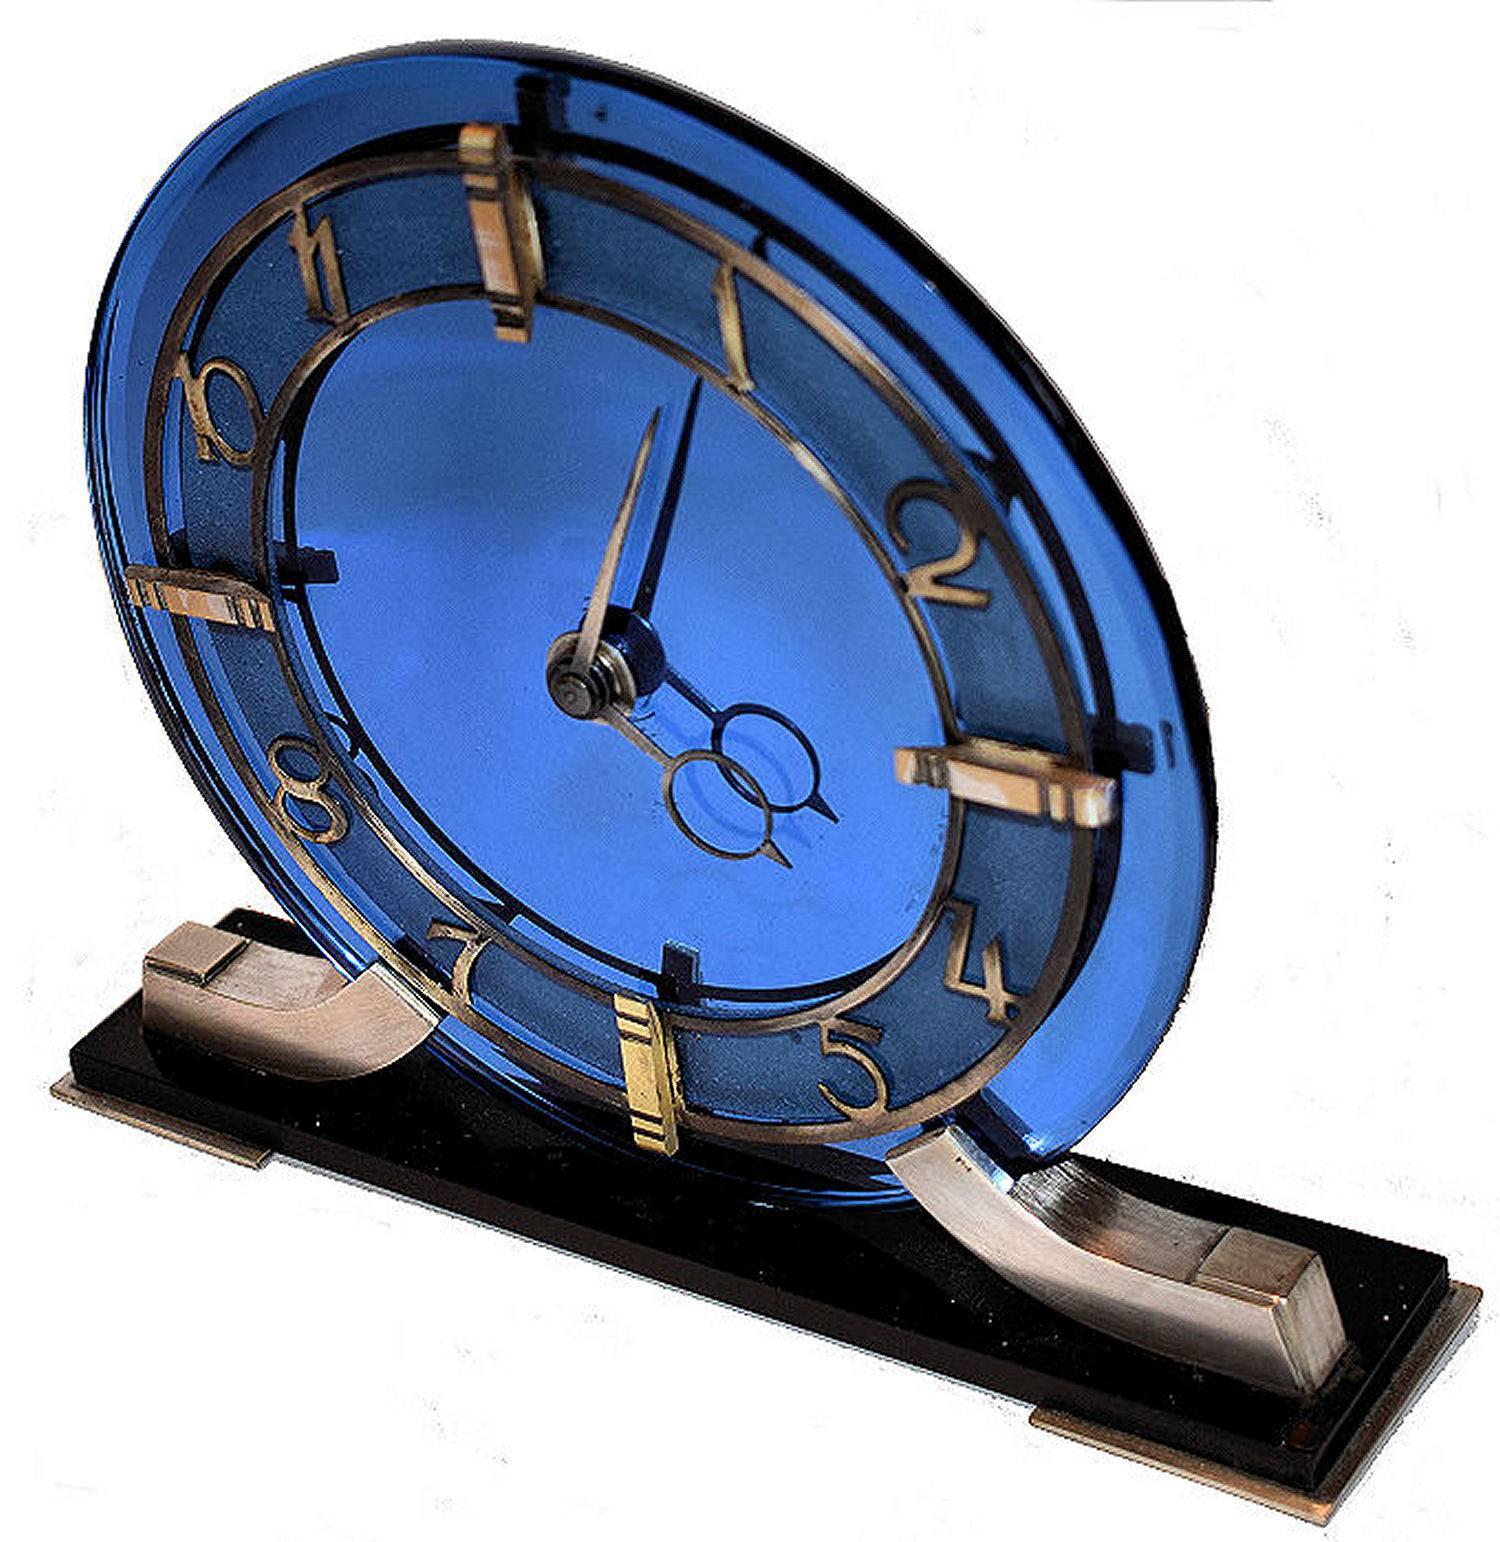 Very attractive and glamourous 1930s Art Deco Modernist clock by Smiths, an English maker. Runs on electric so no winding needed. Features a heavy thick blue mirror glass face with gilded Bezel and black plinth. The condition is excellent, showing